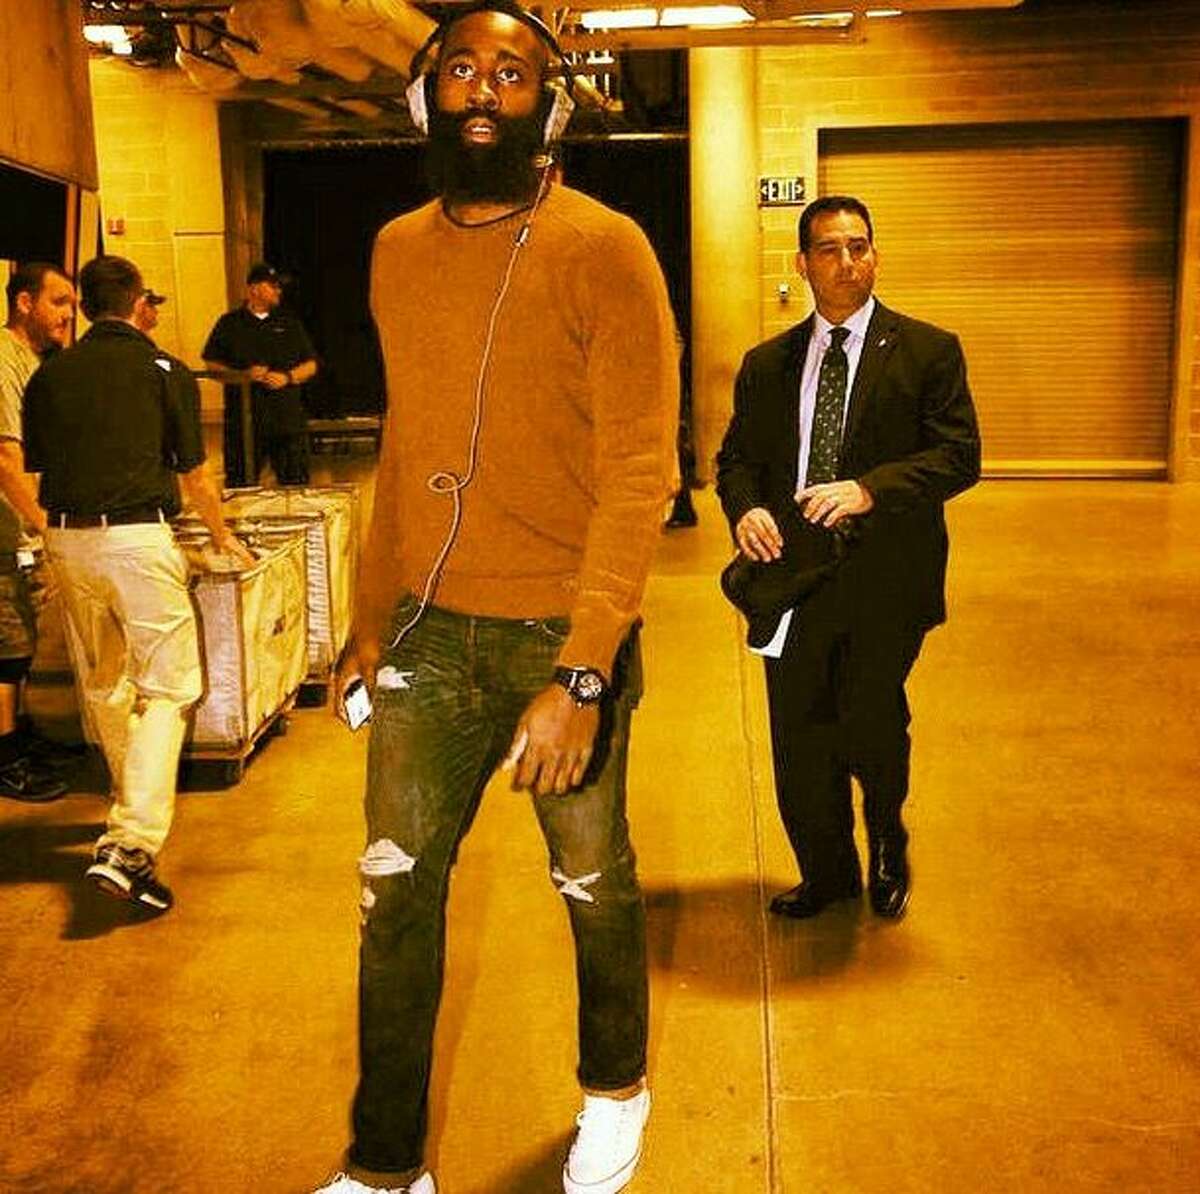 James Harden's fashion sense lands him in all-star style event